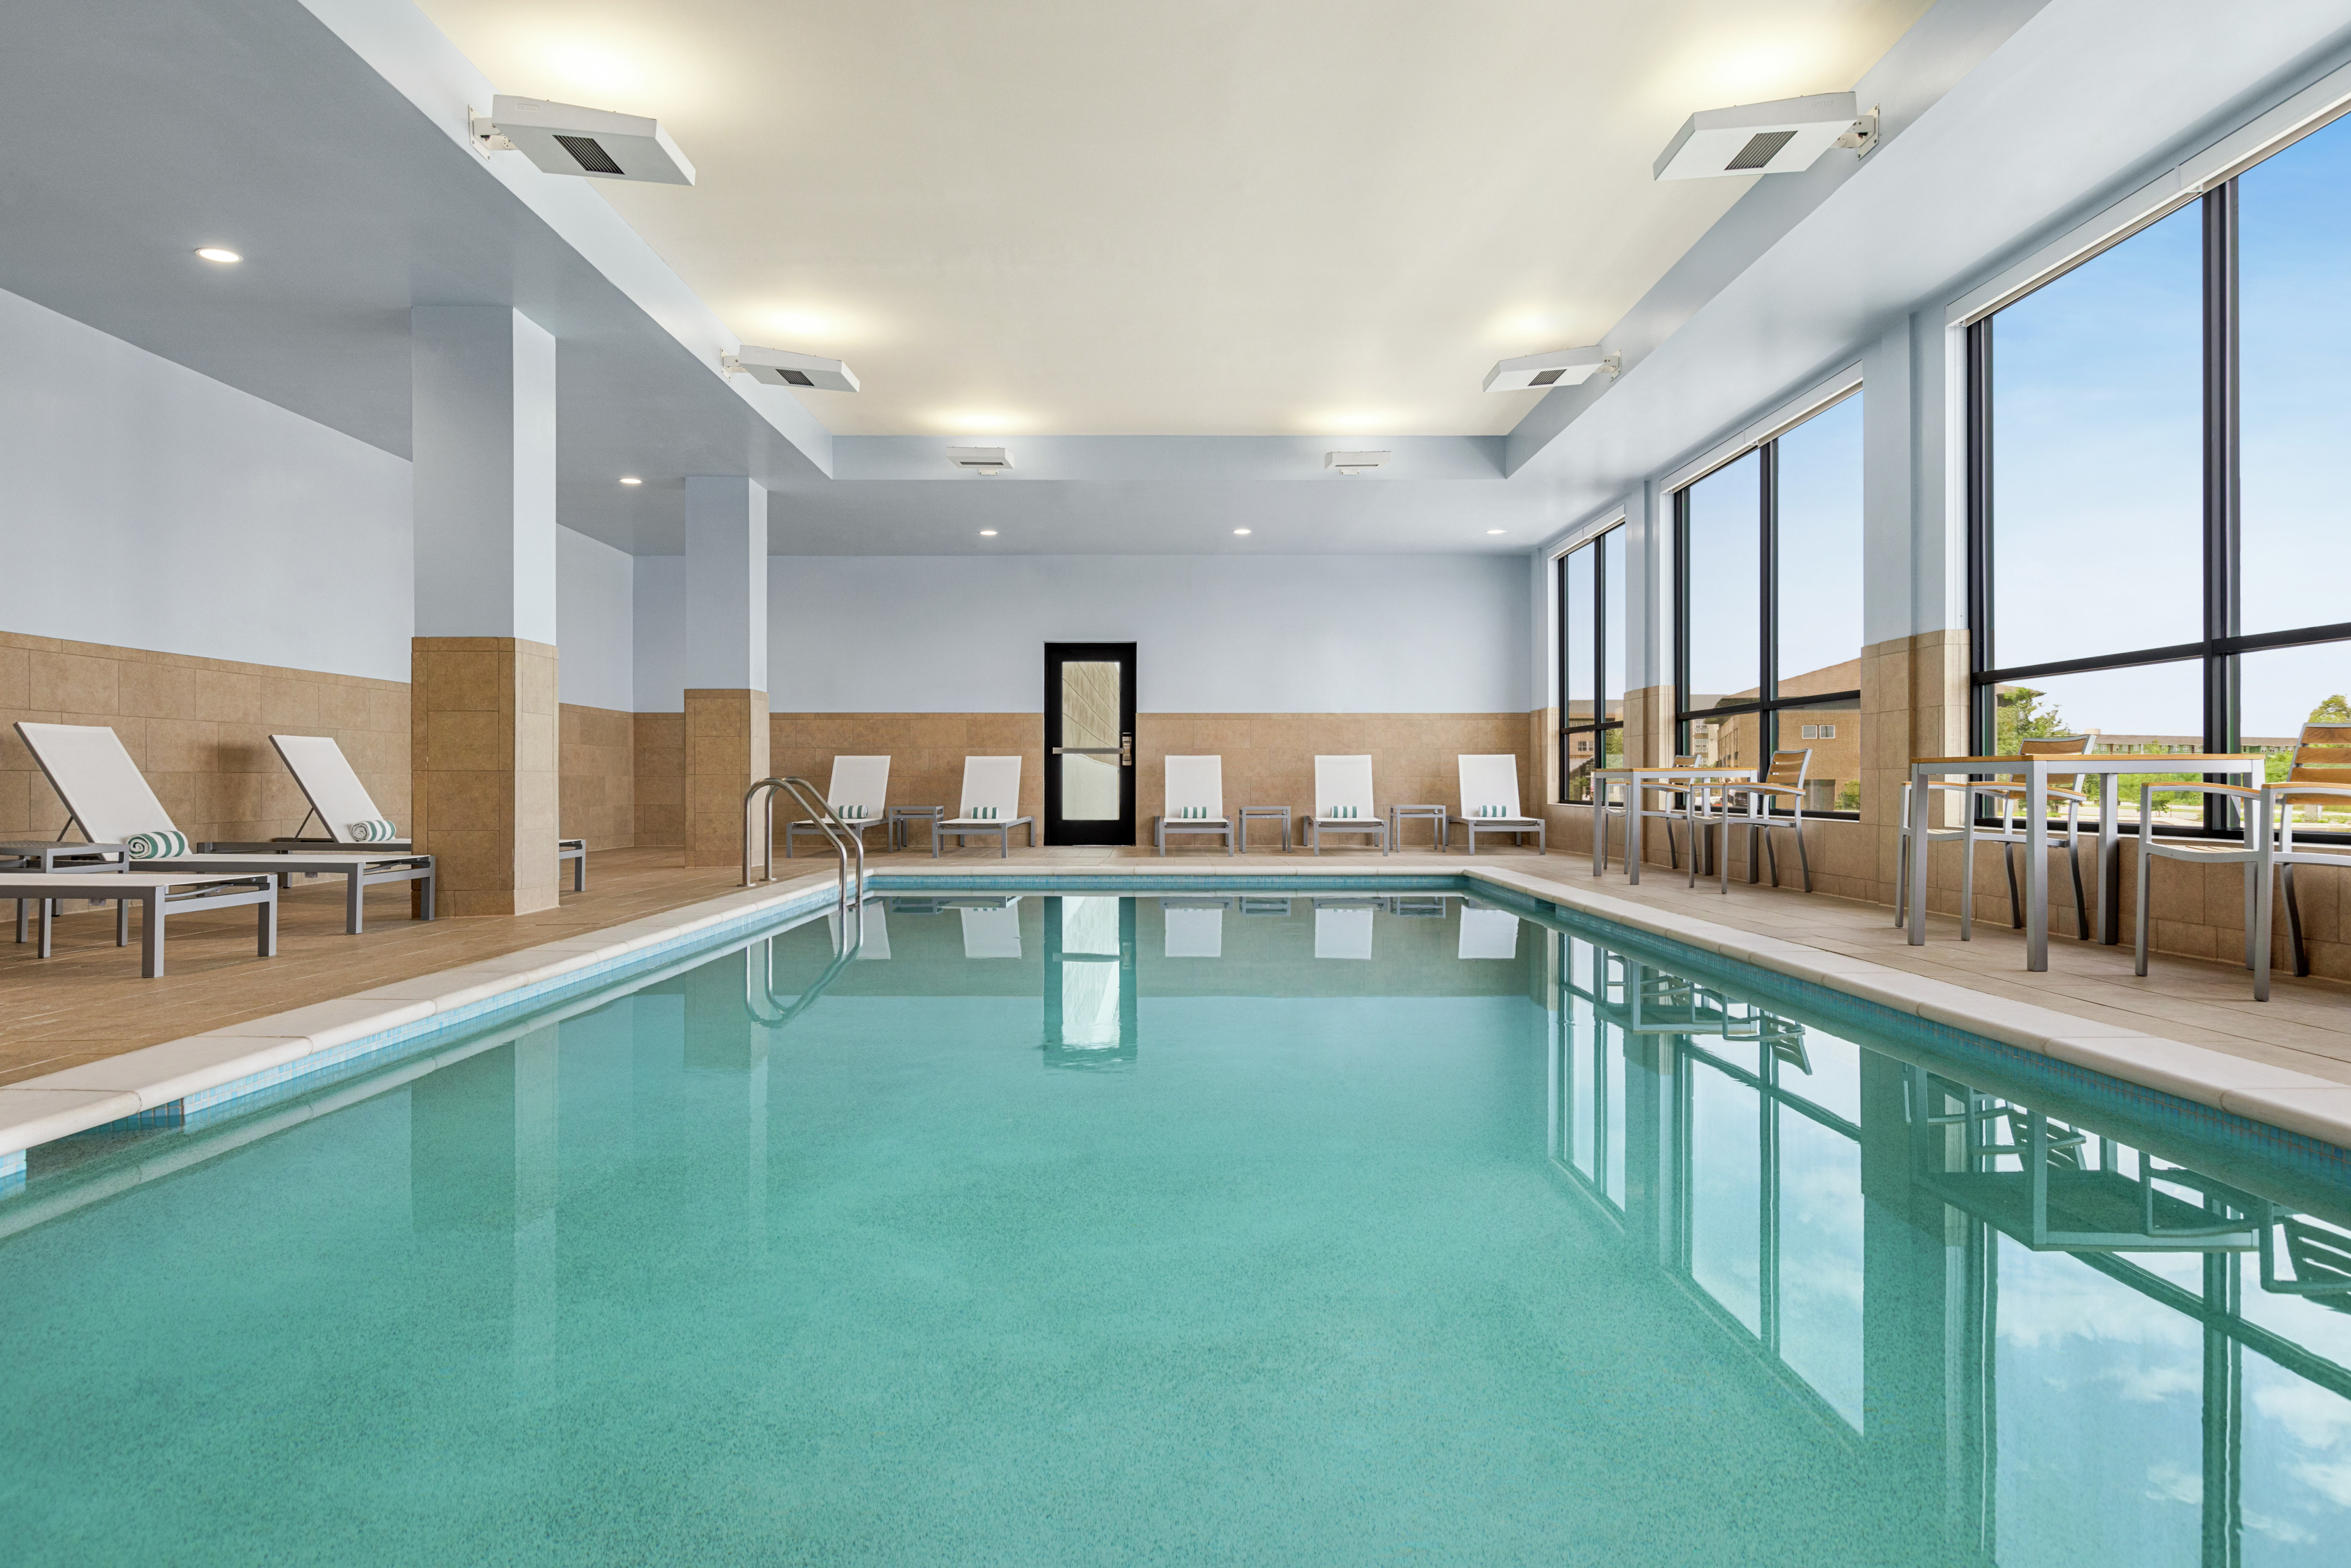 Spacious indoor pool featuring ample seating and large bright windows.